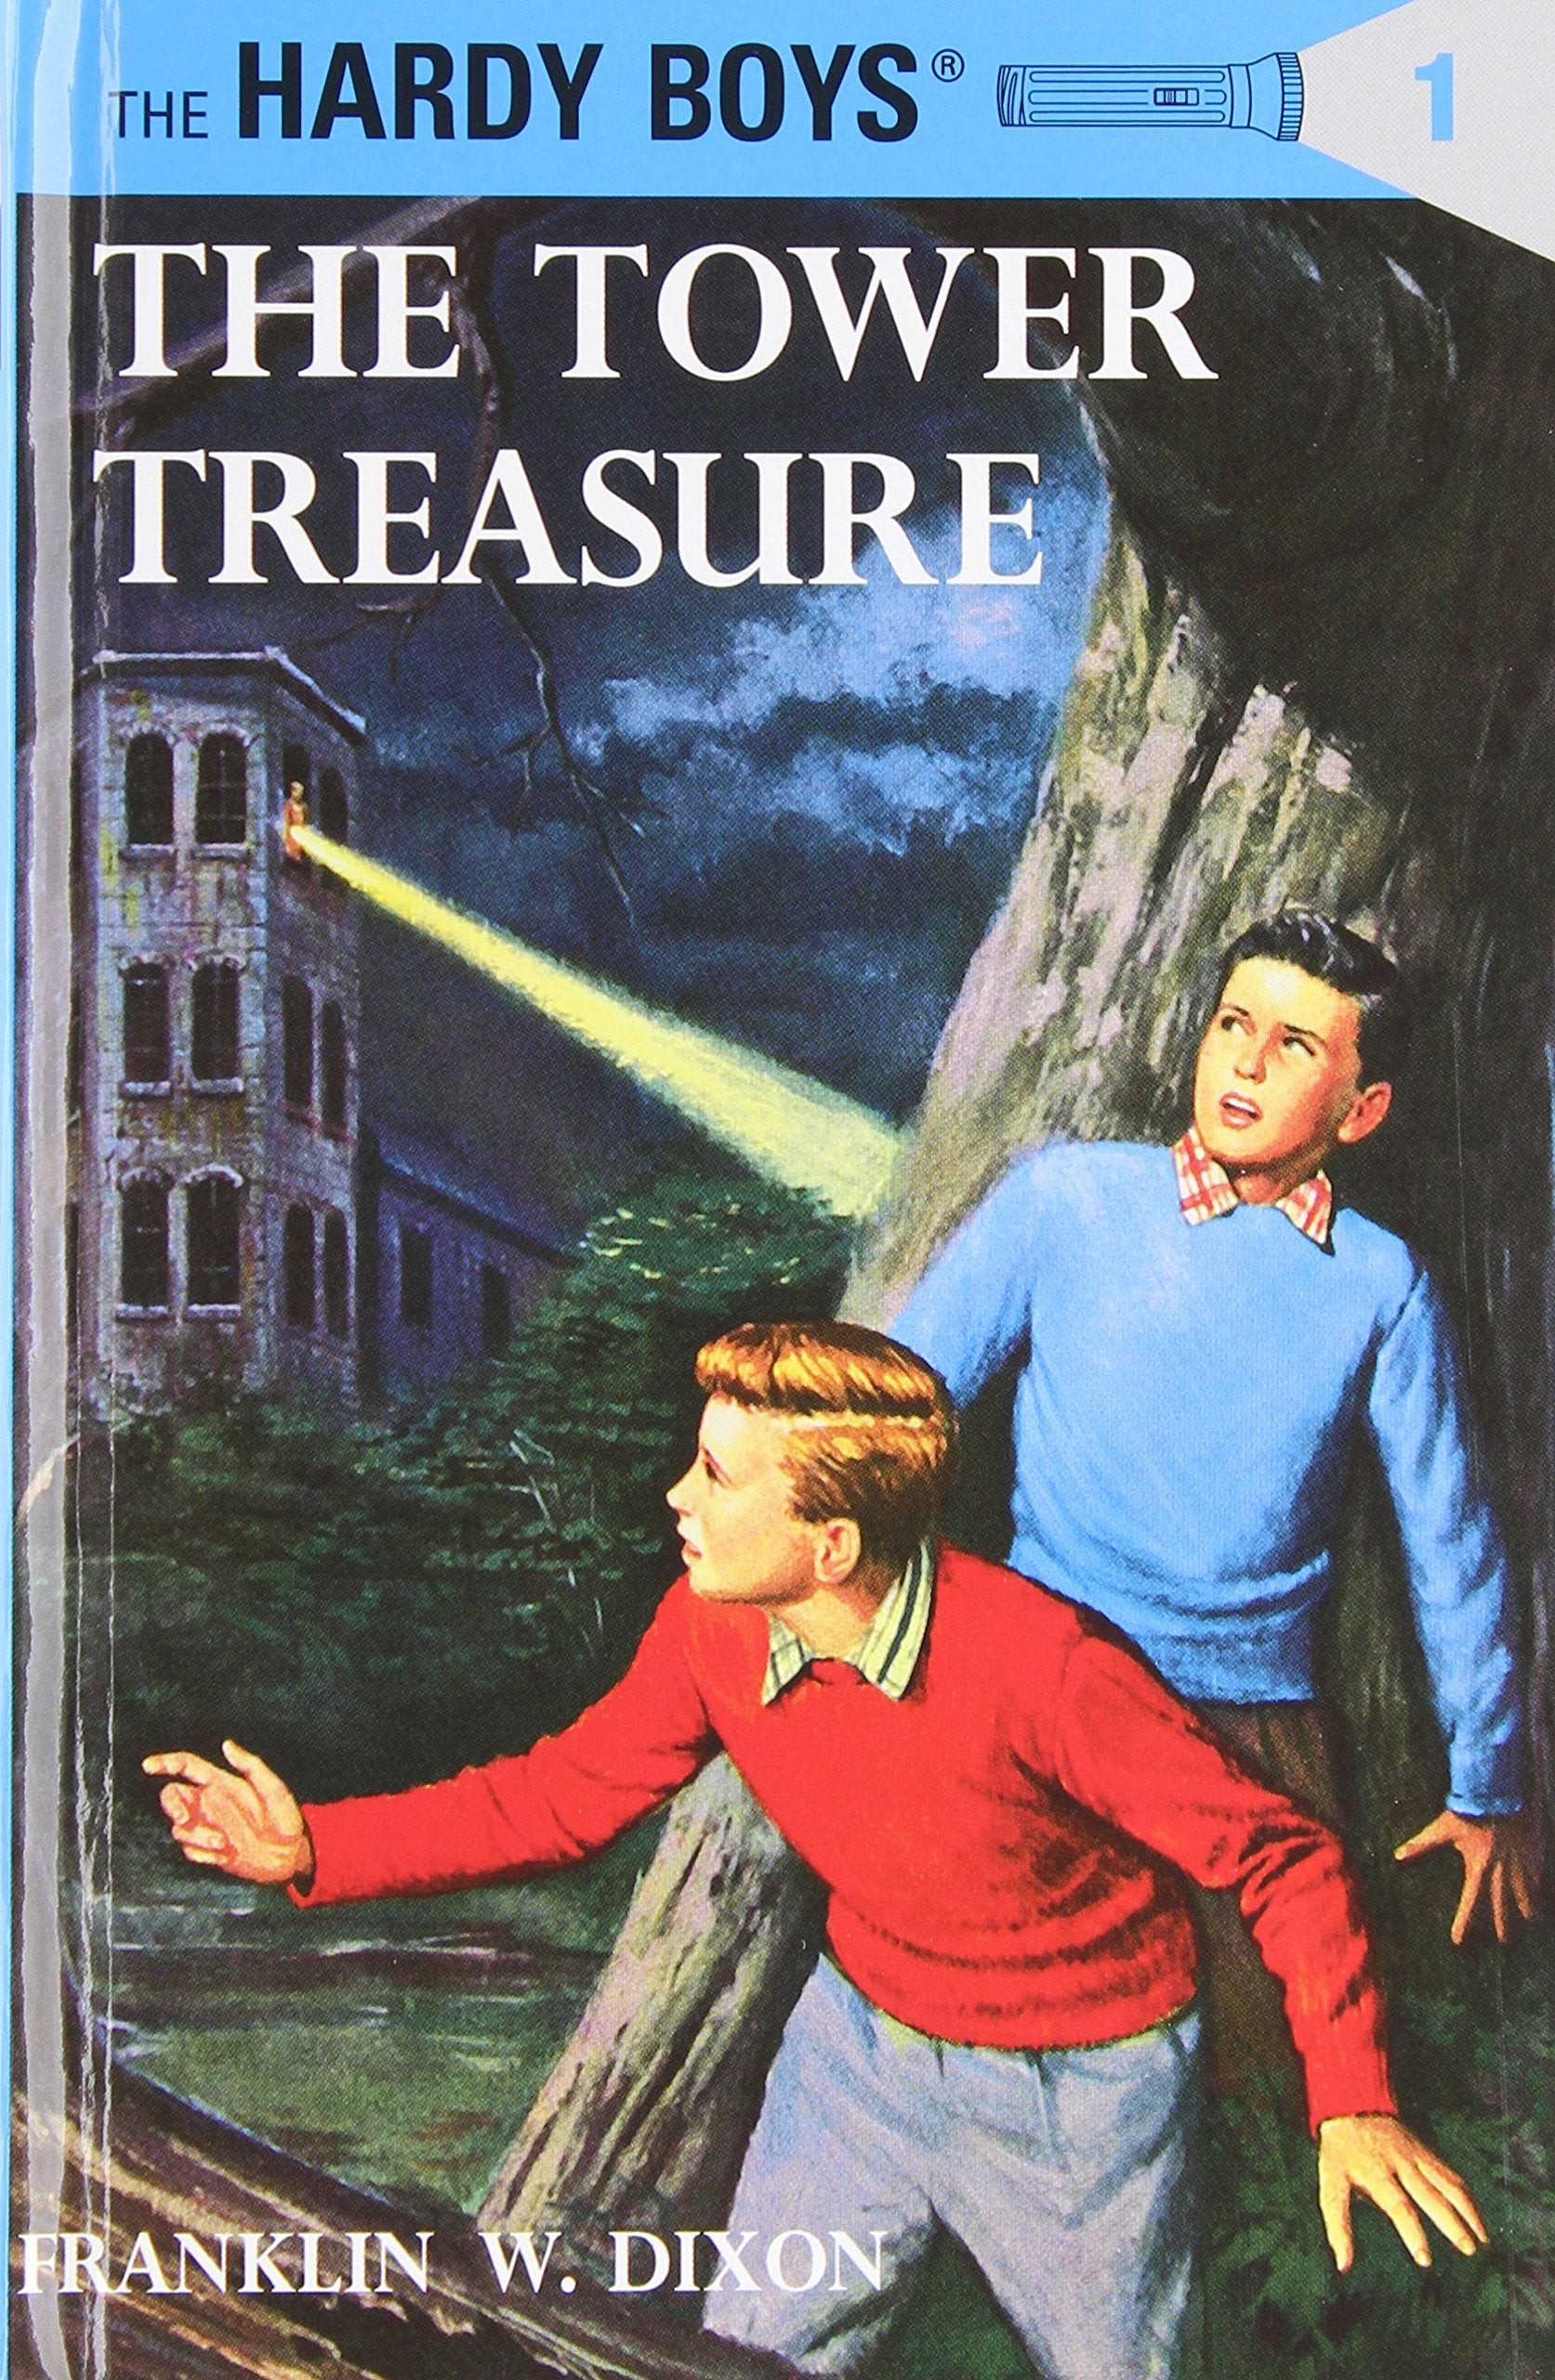 The Hardy Boys by Edward Stratemeyer: A Children's Book Series